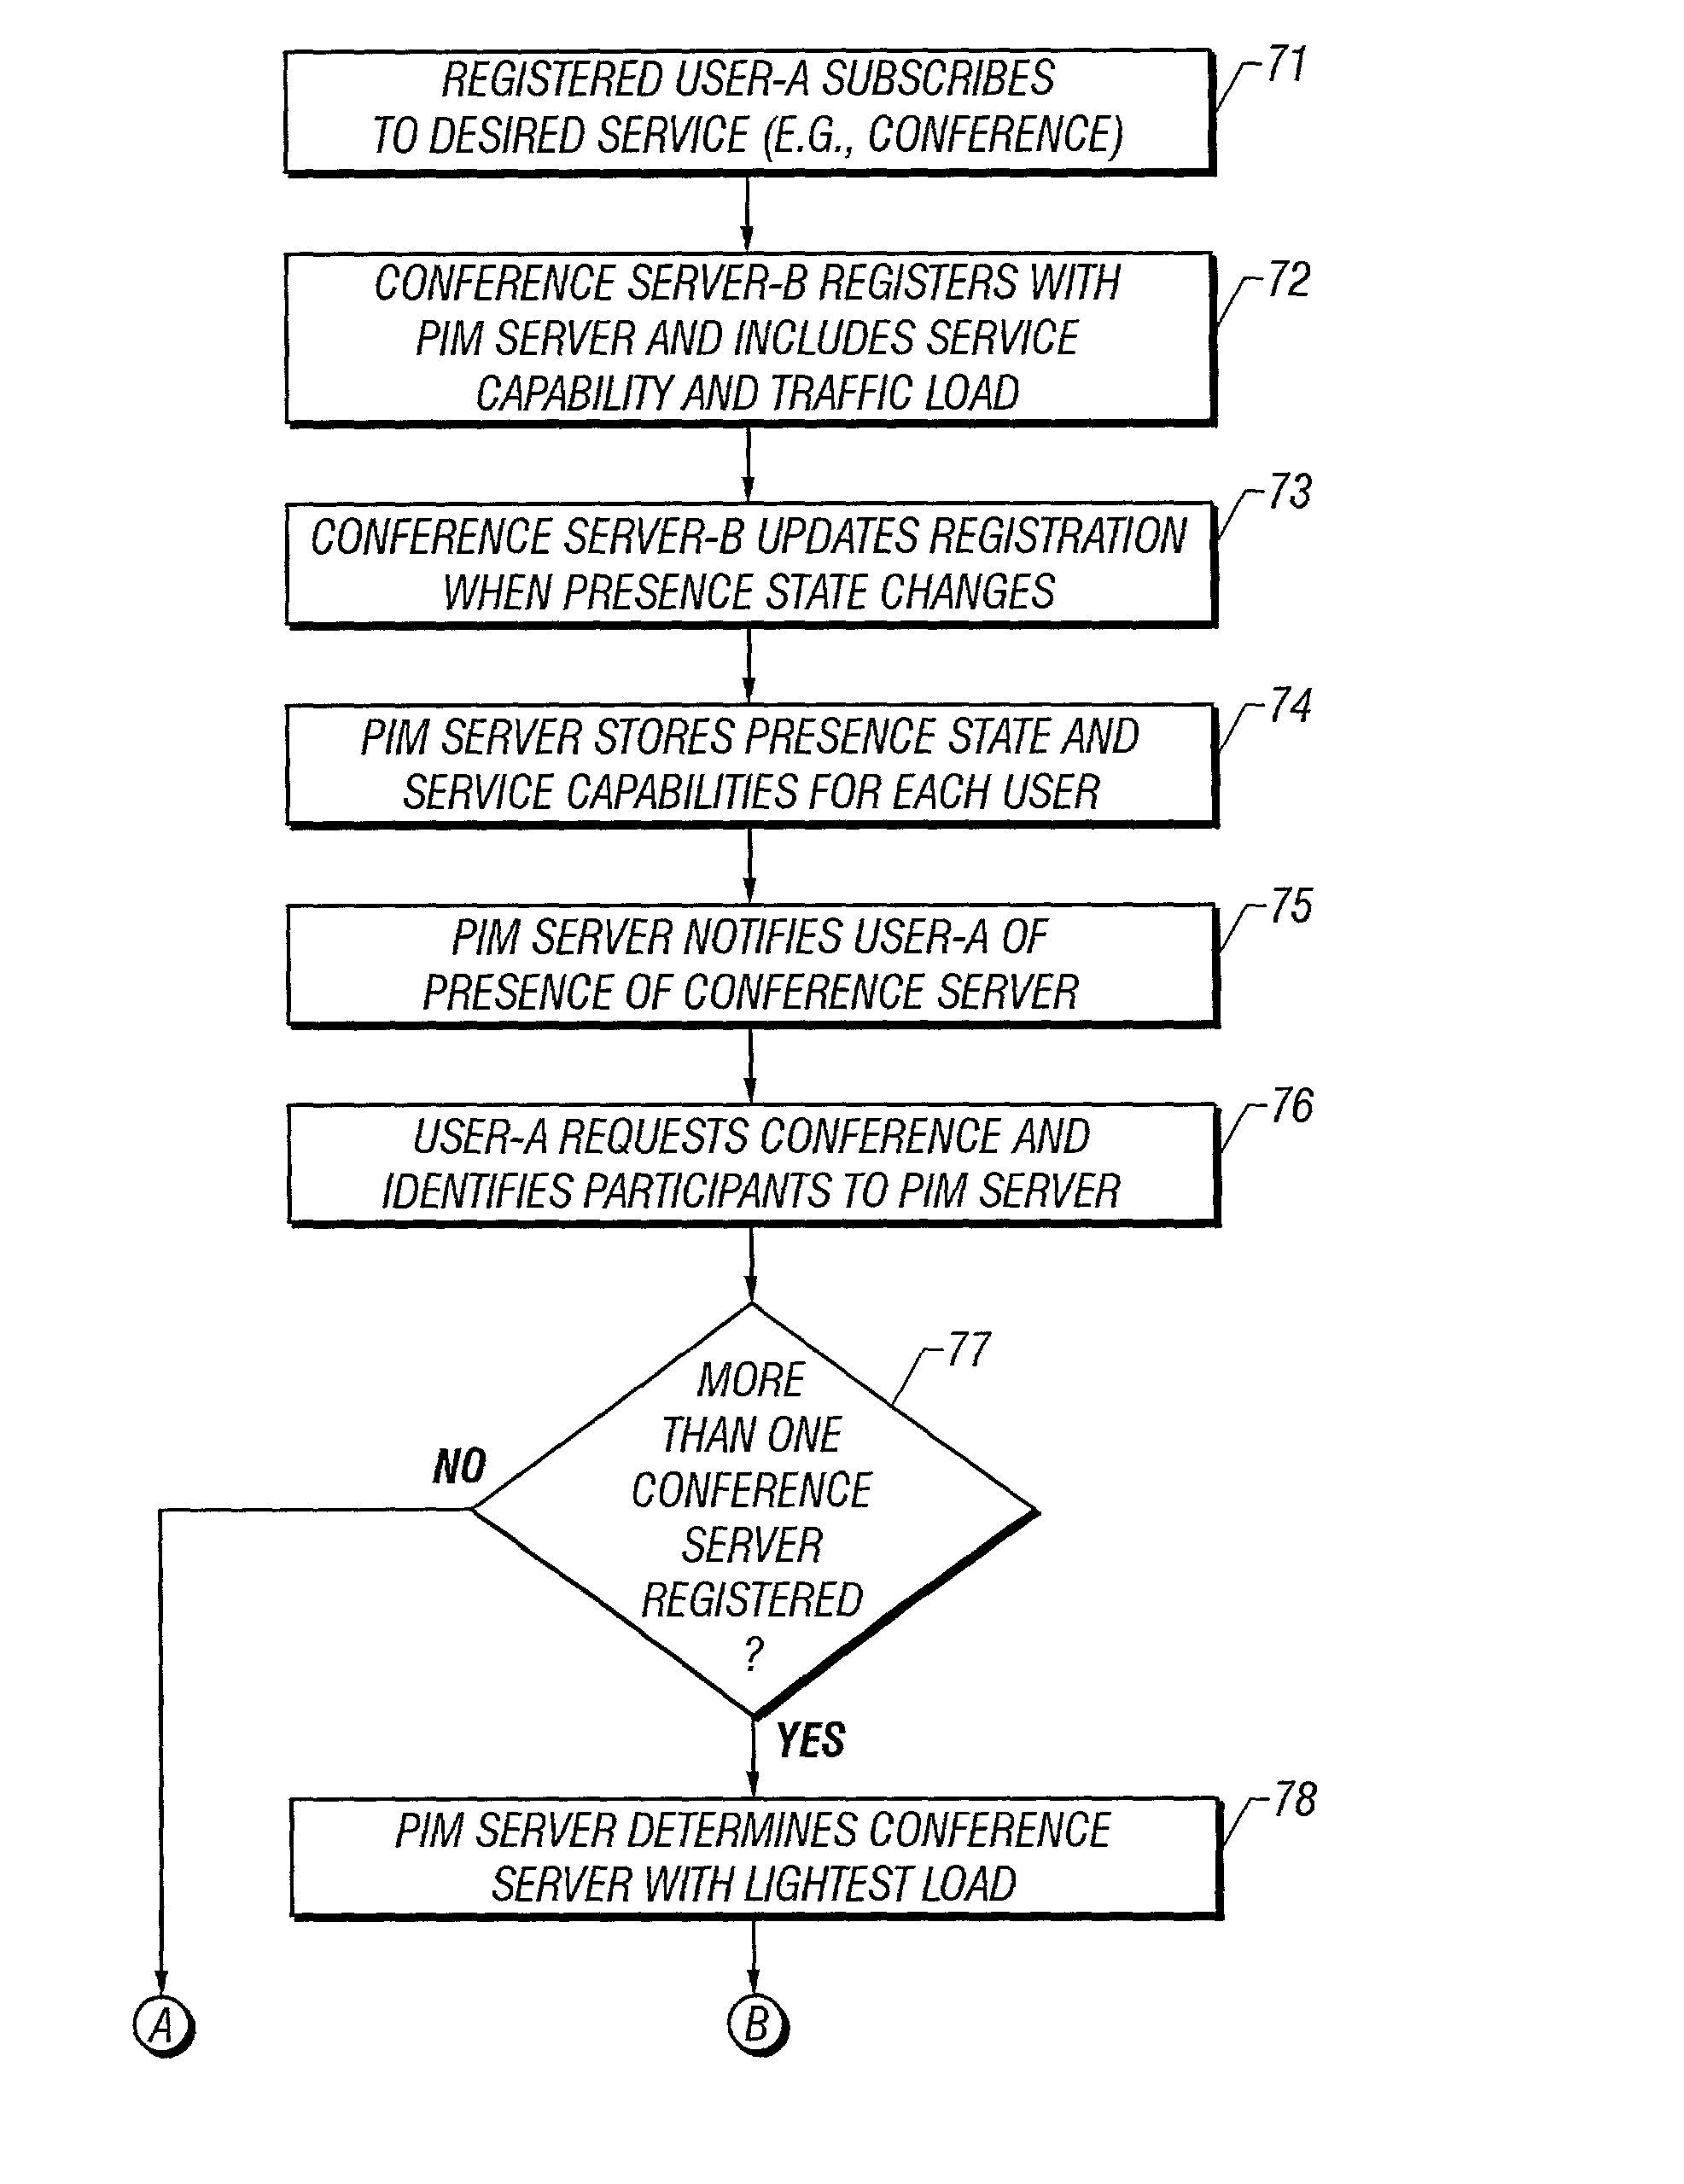 Service access system and method in a telecommunications network